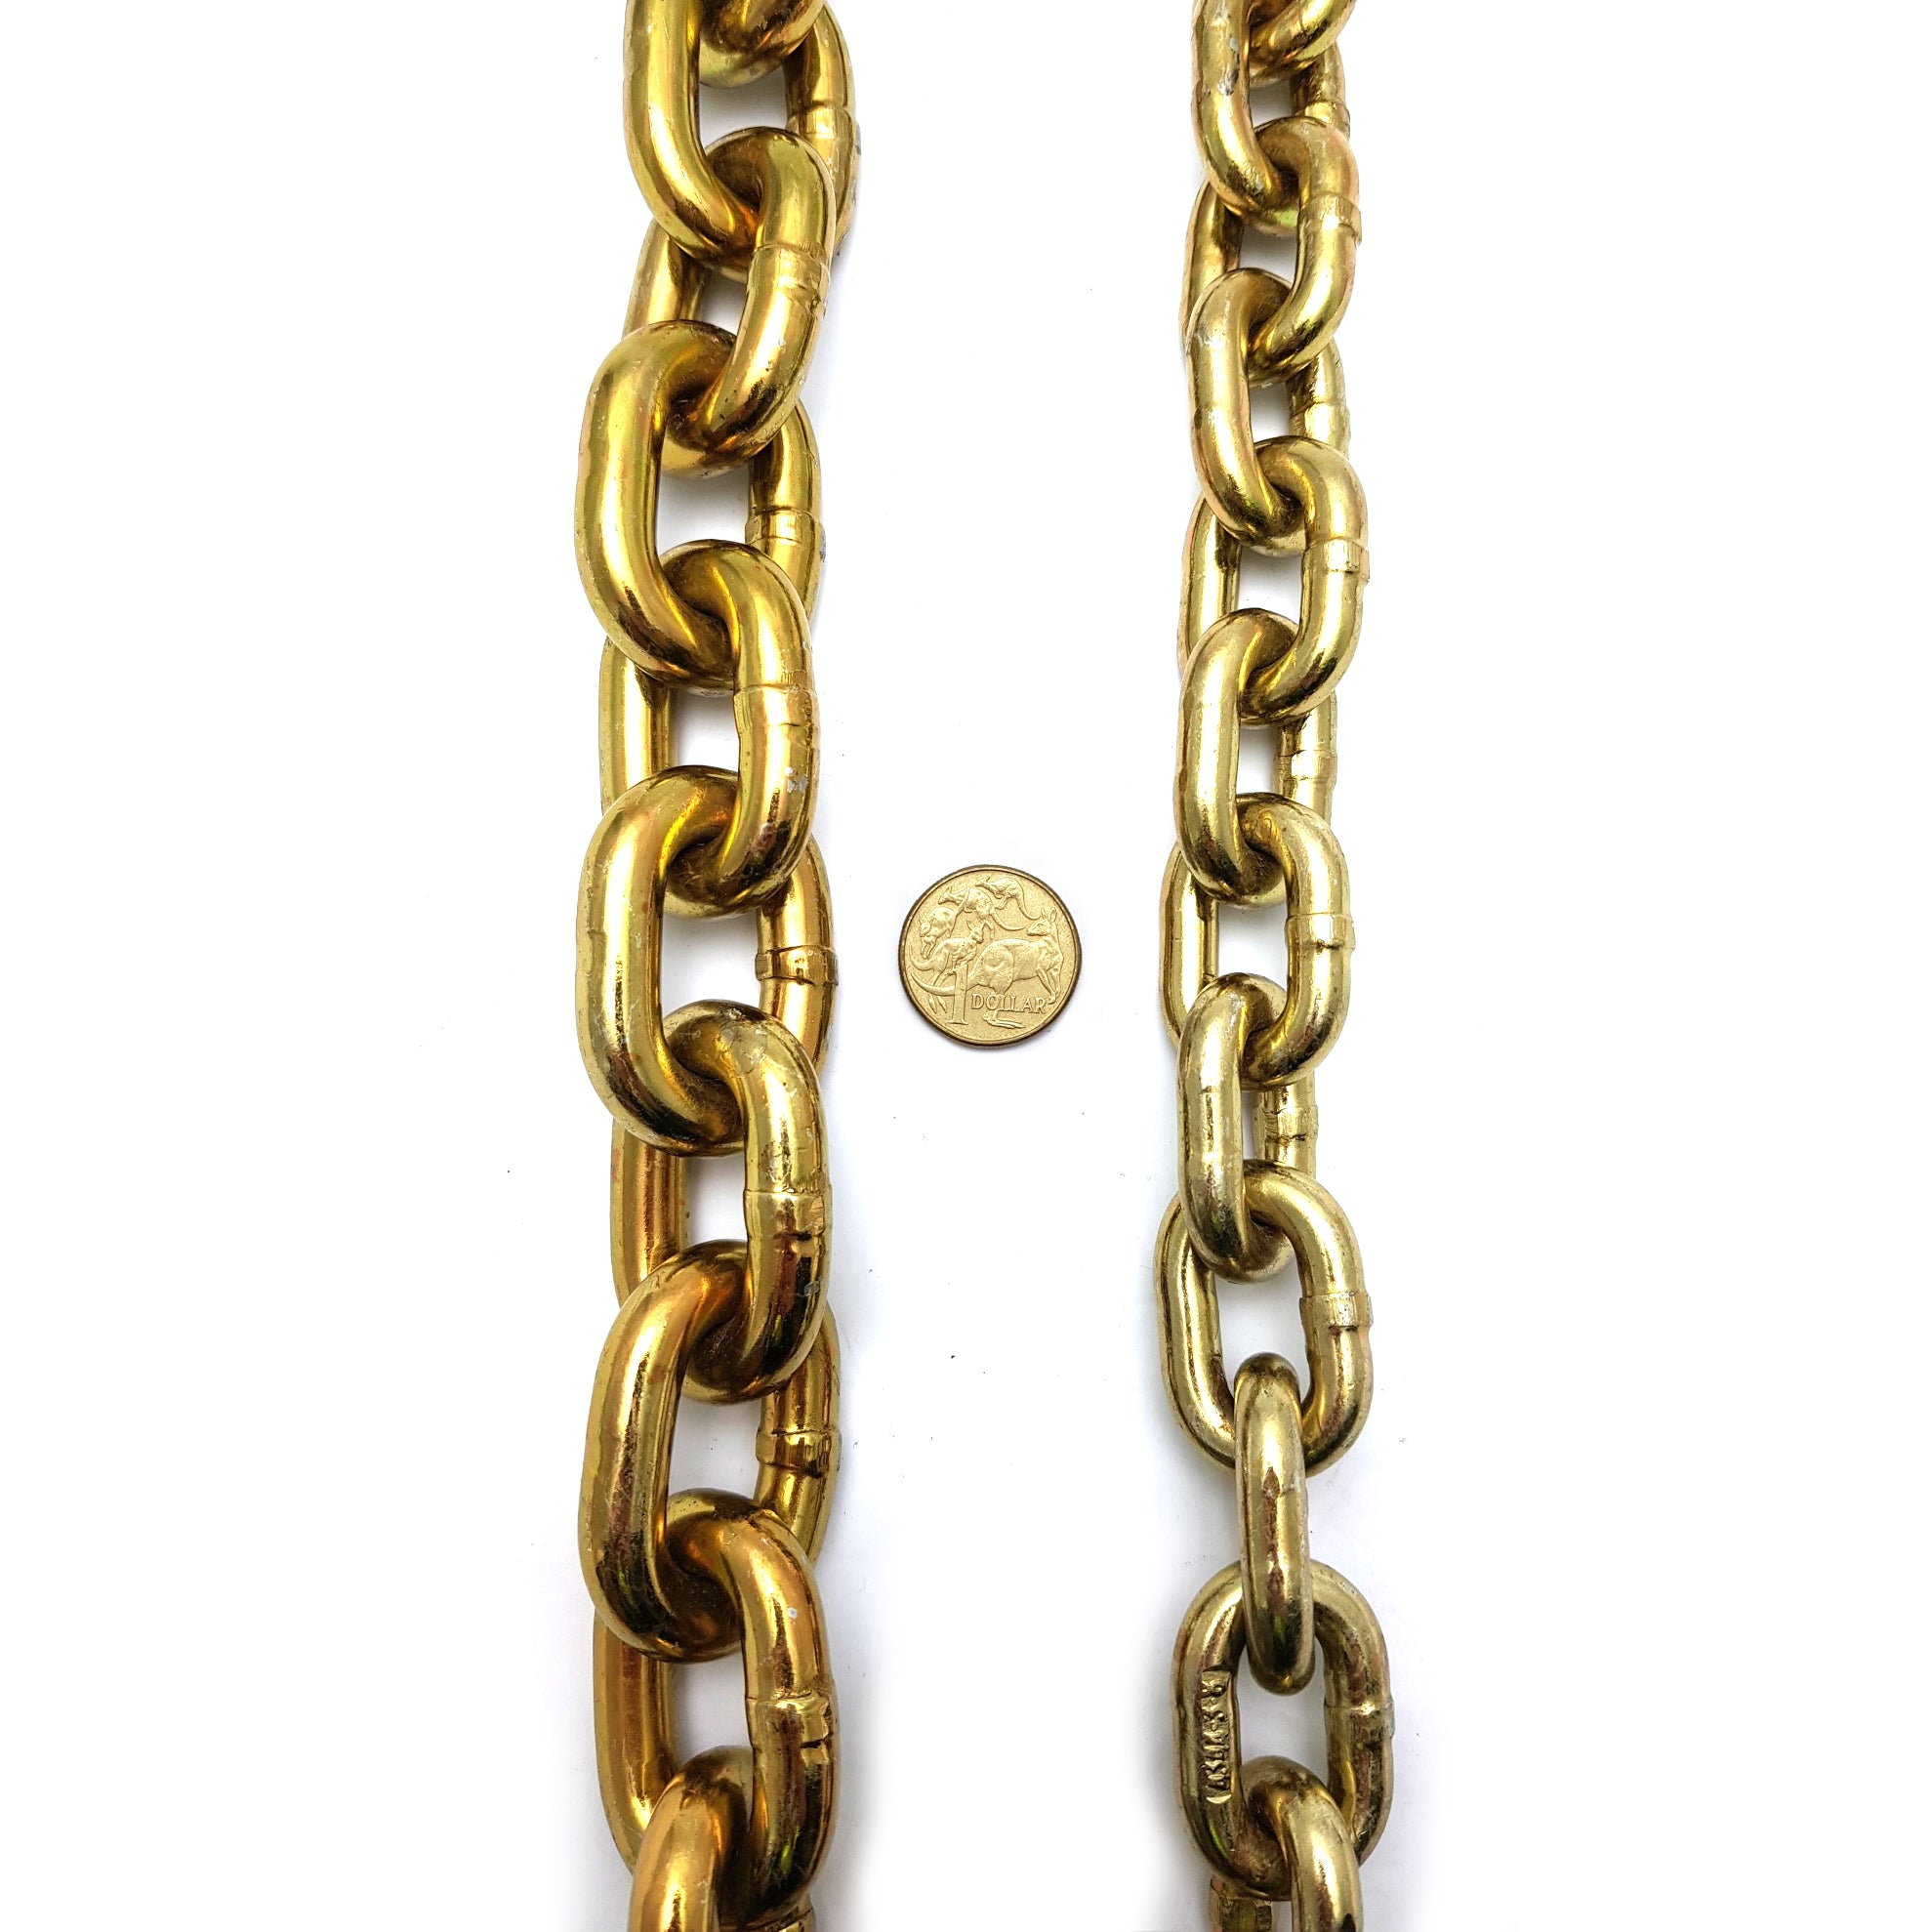 Security Chain, size 8mm and 10mm. Melbourne, Australia.